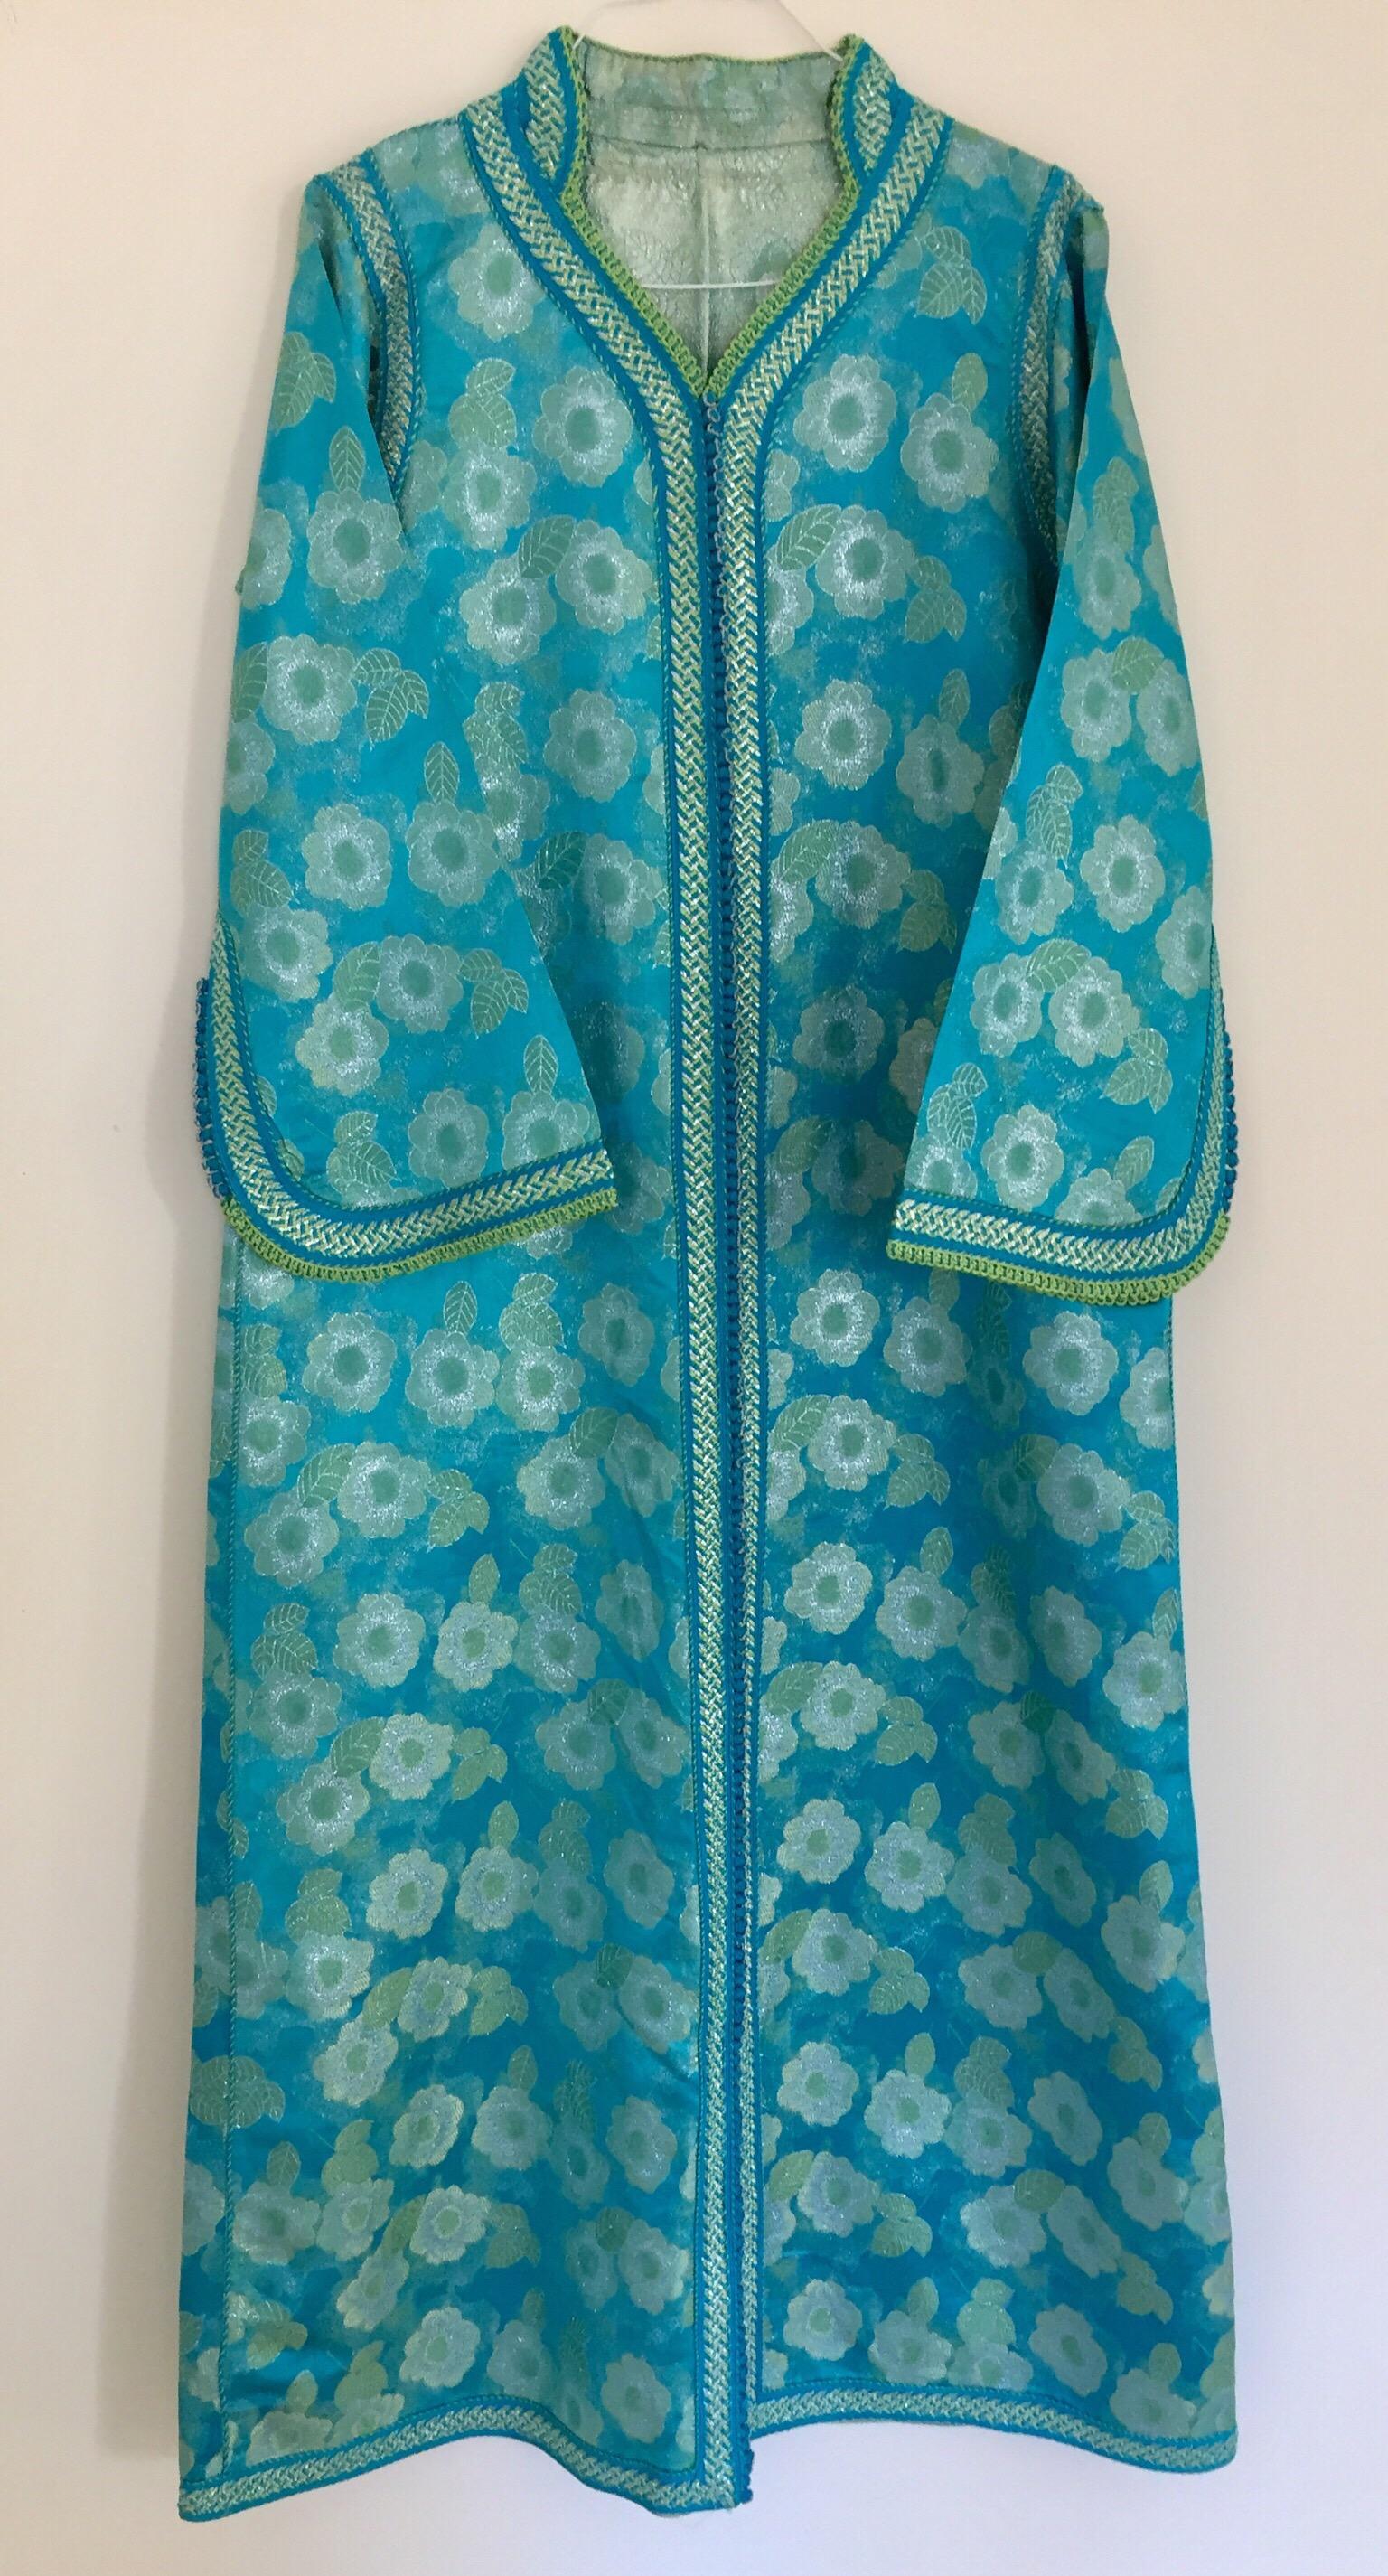 Vintage Moroccan Kaftan in Turquoise and Gold Floral Brocade For Sale 3